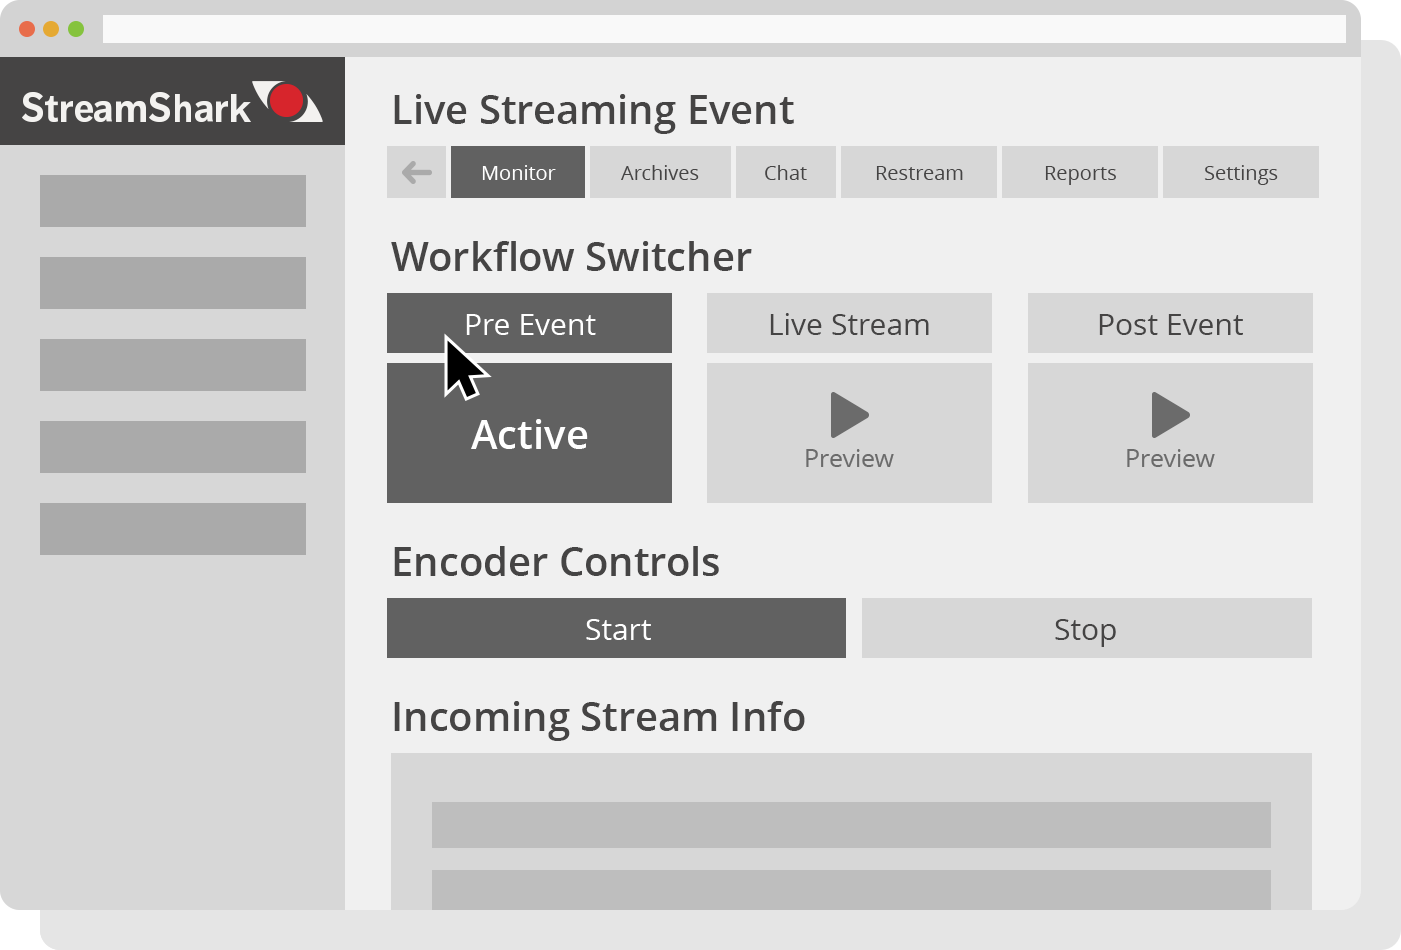 Live Streaming Workflow With Encoder Controls